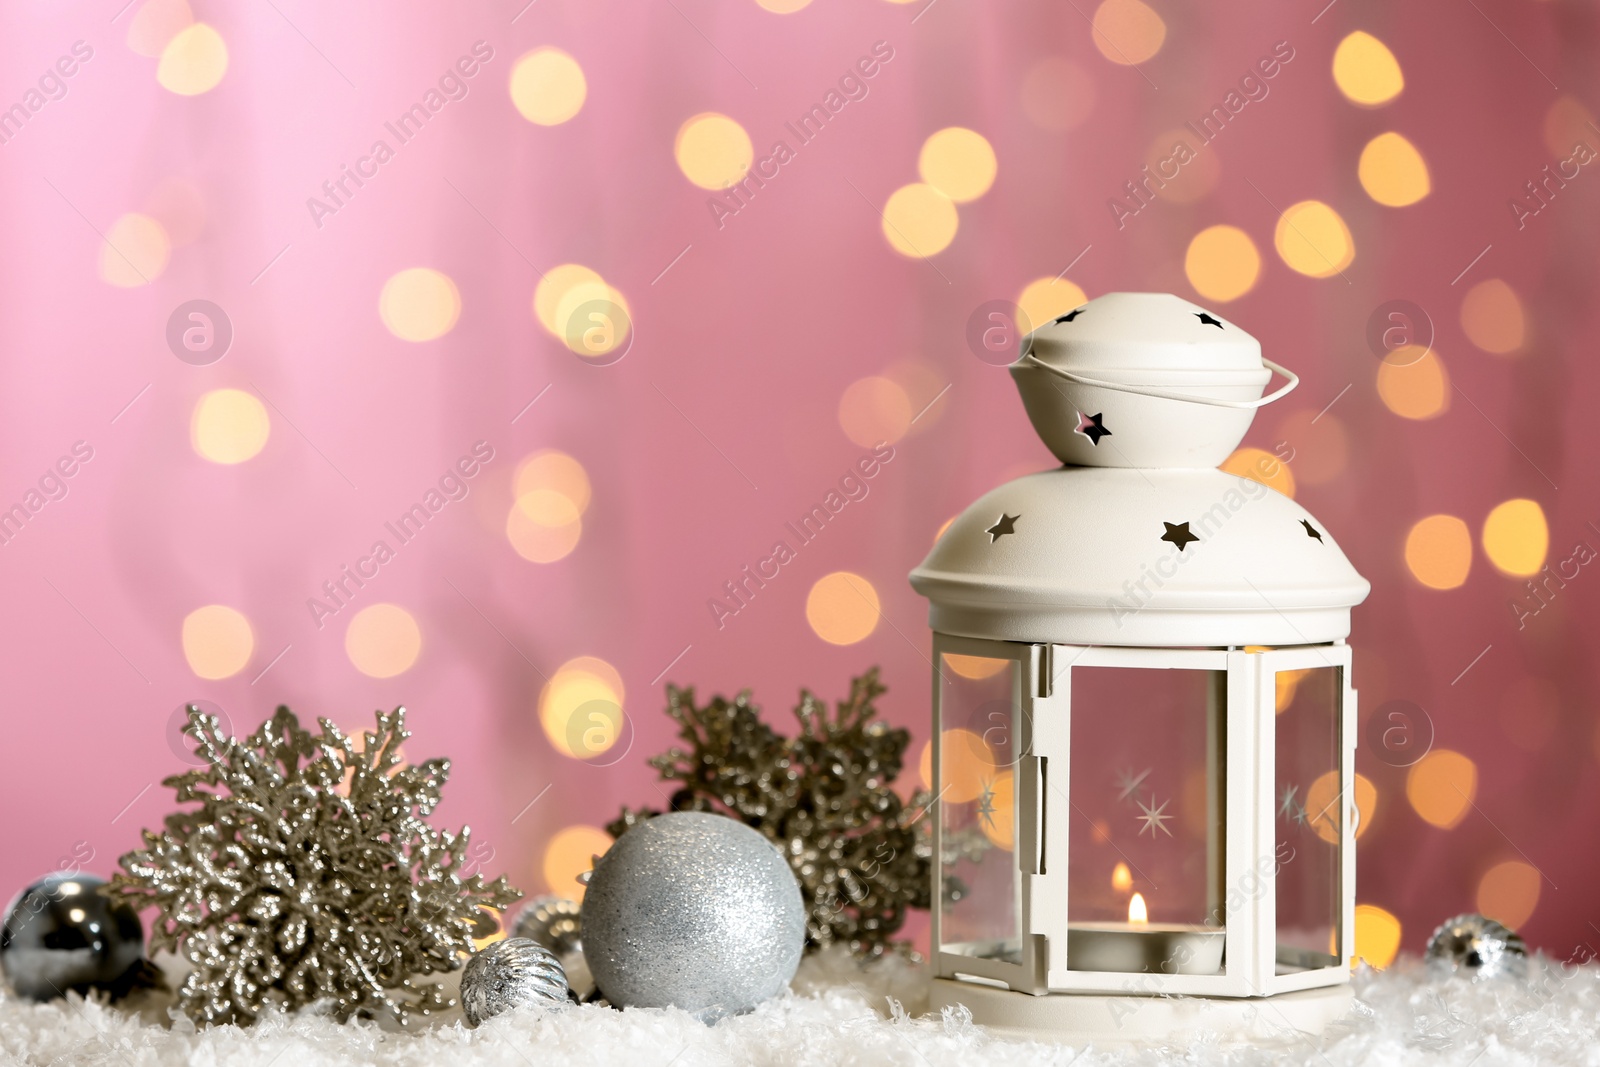 Photo of Christmas lantern with burning candle and festive decor on snow against blurred lights